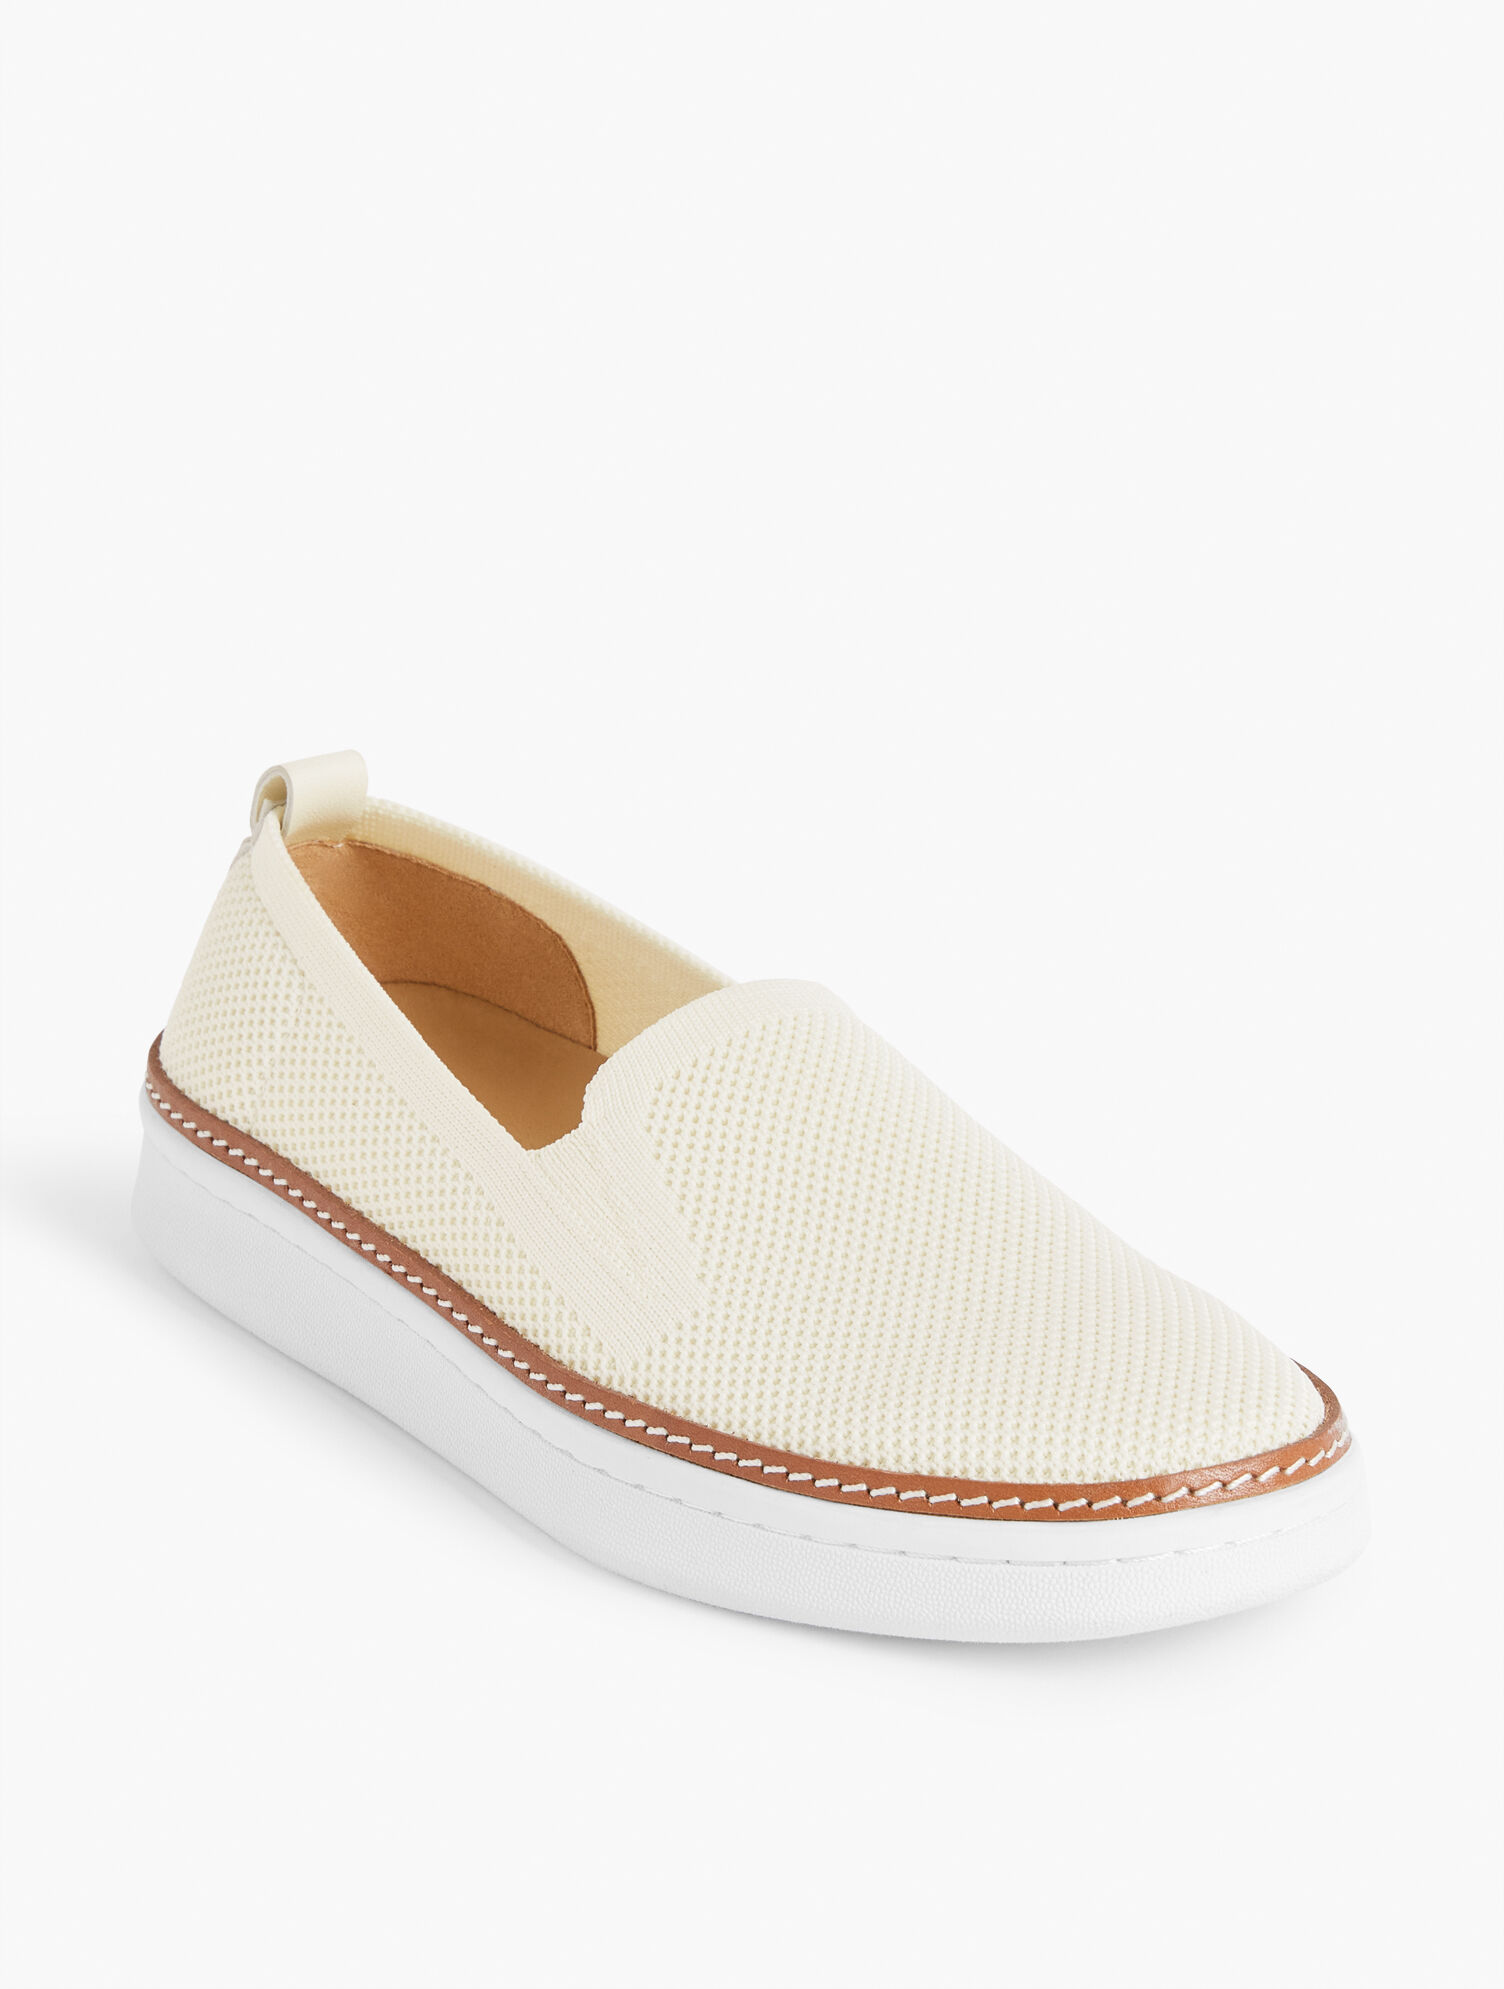 Brittany Knit Sneakers